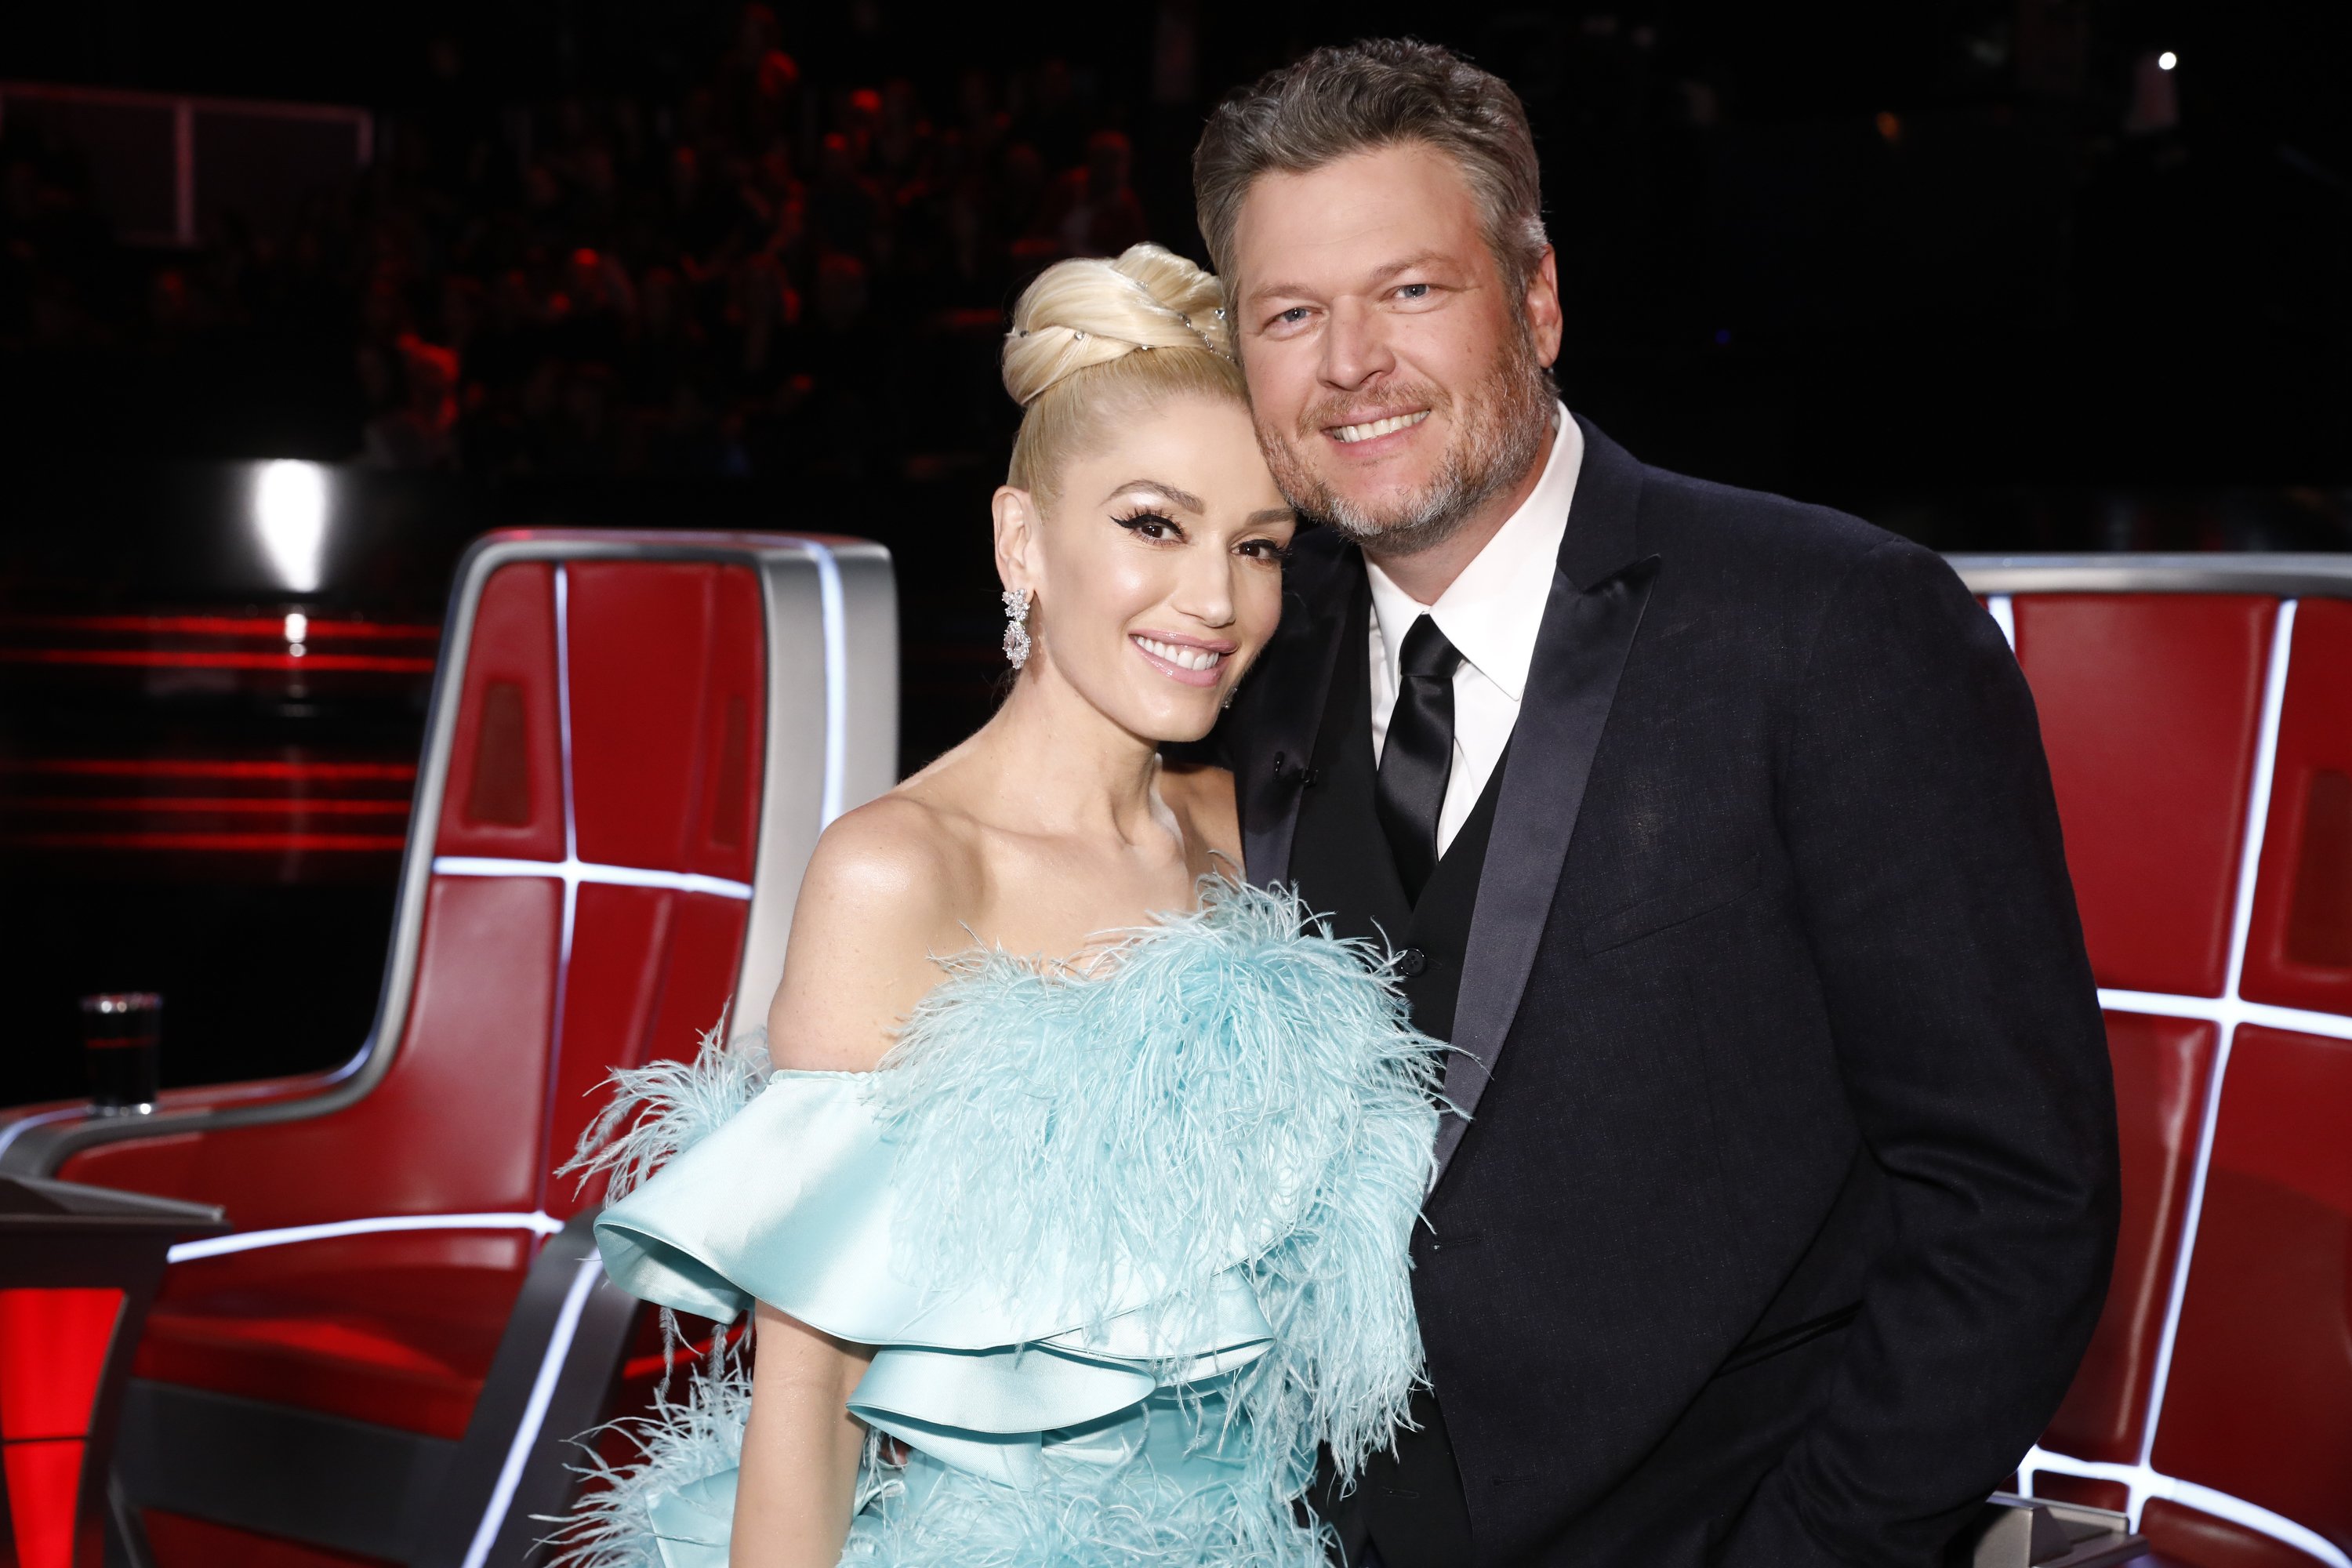 Gwen Stefani and Blake Shelton on the set of "The Voice." | Photo: Getty Images